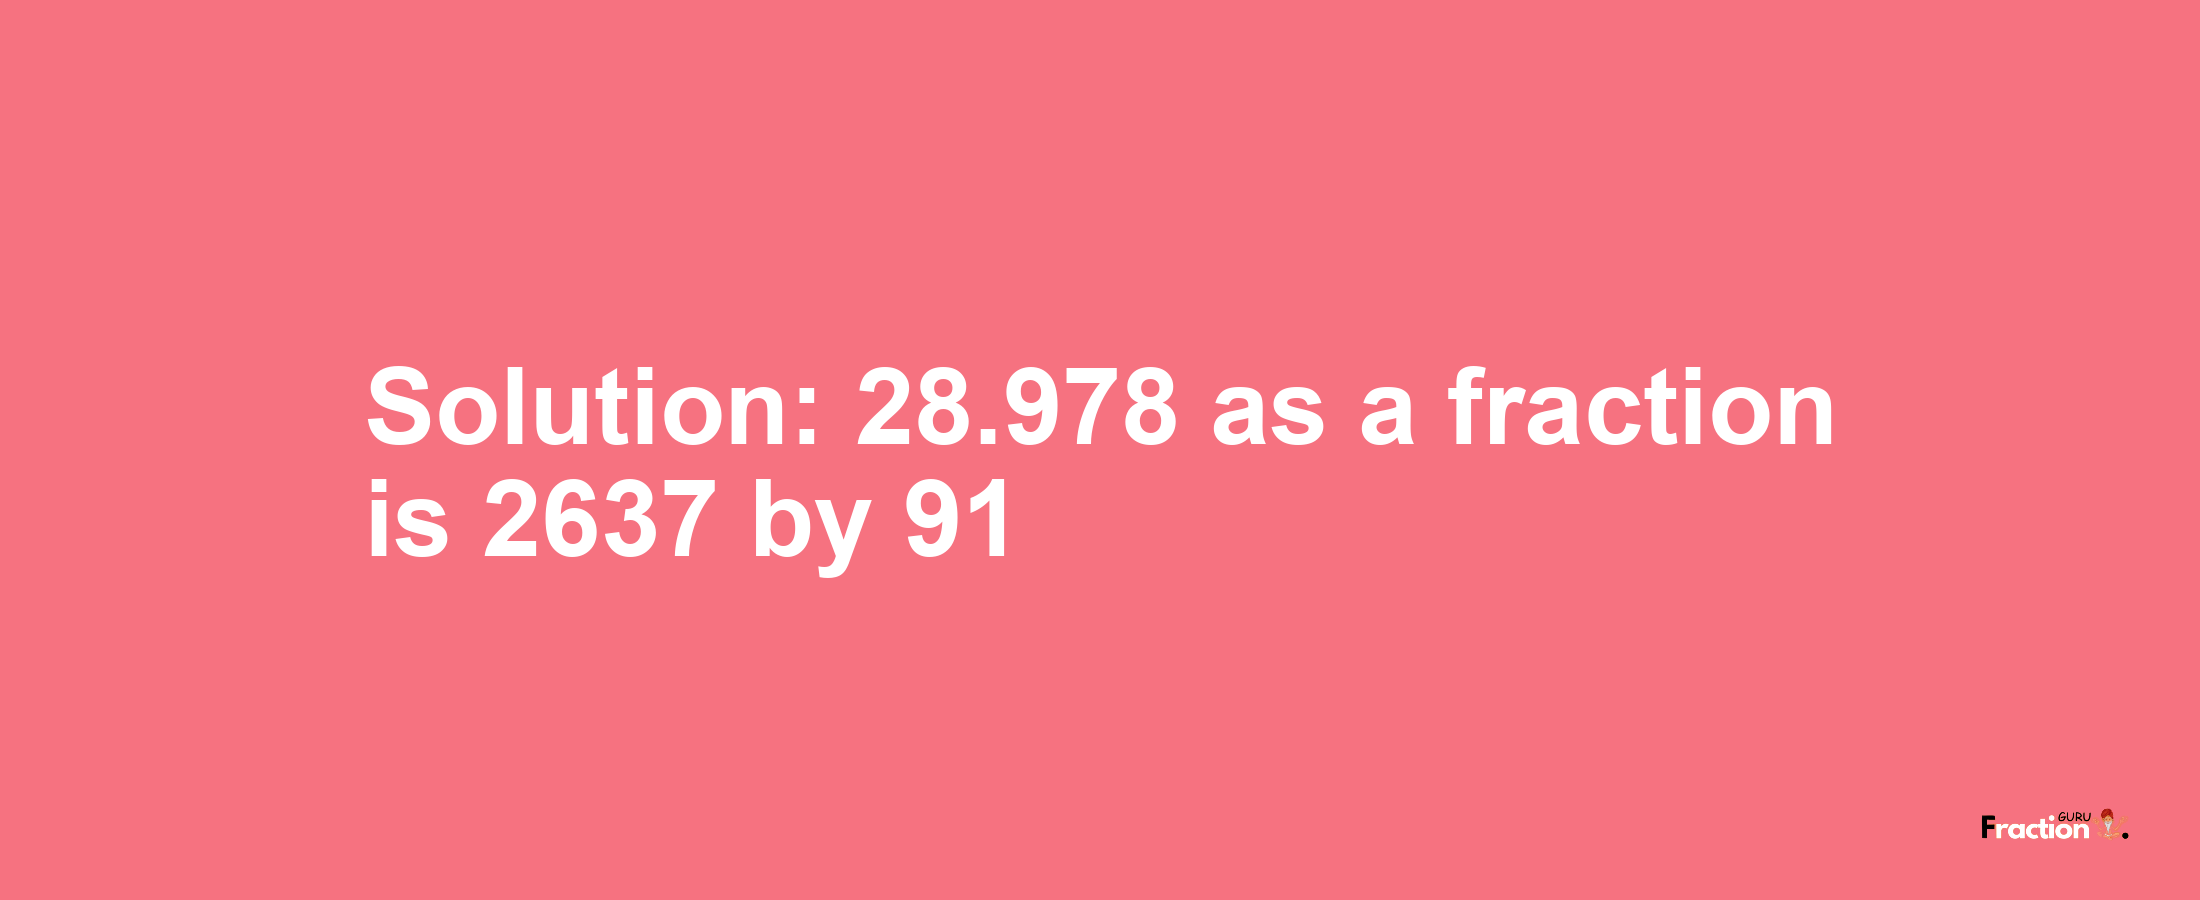 Solution:28.978 as a fraction is 2637/91